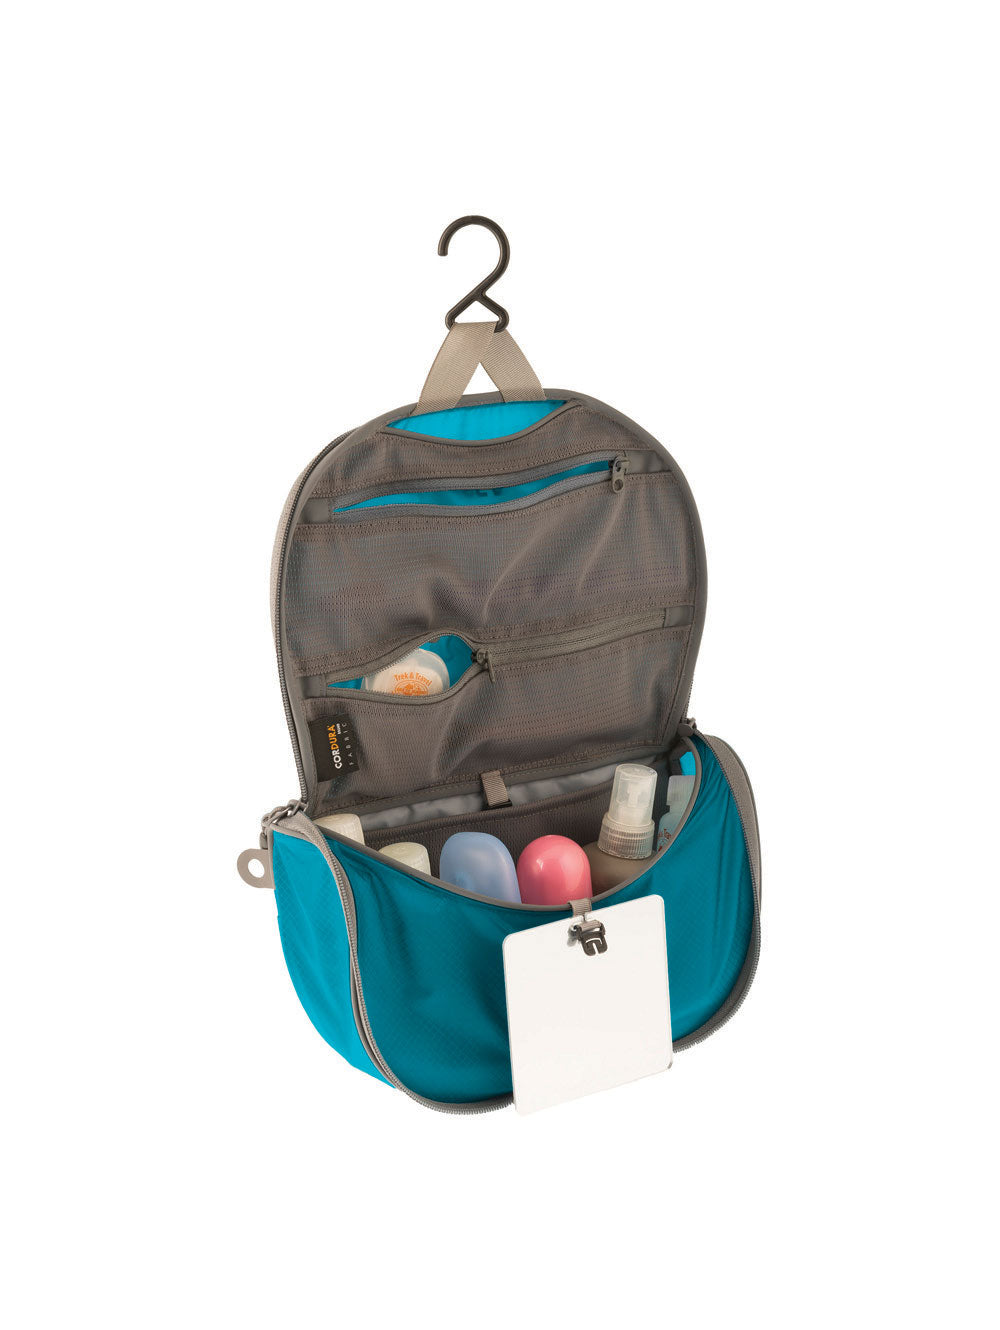 Hanging Toiletry Kit Small